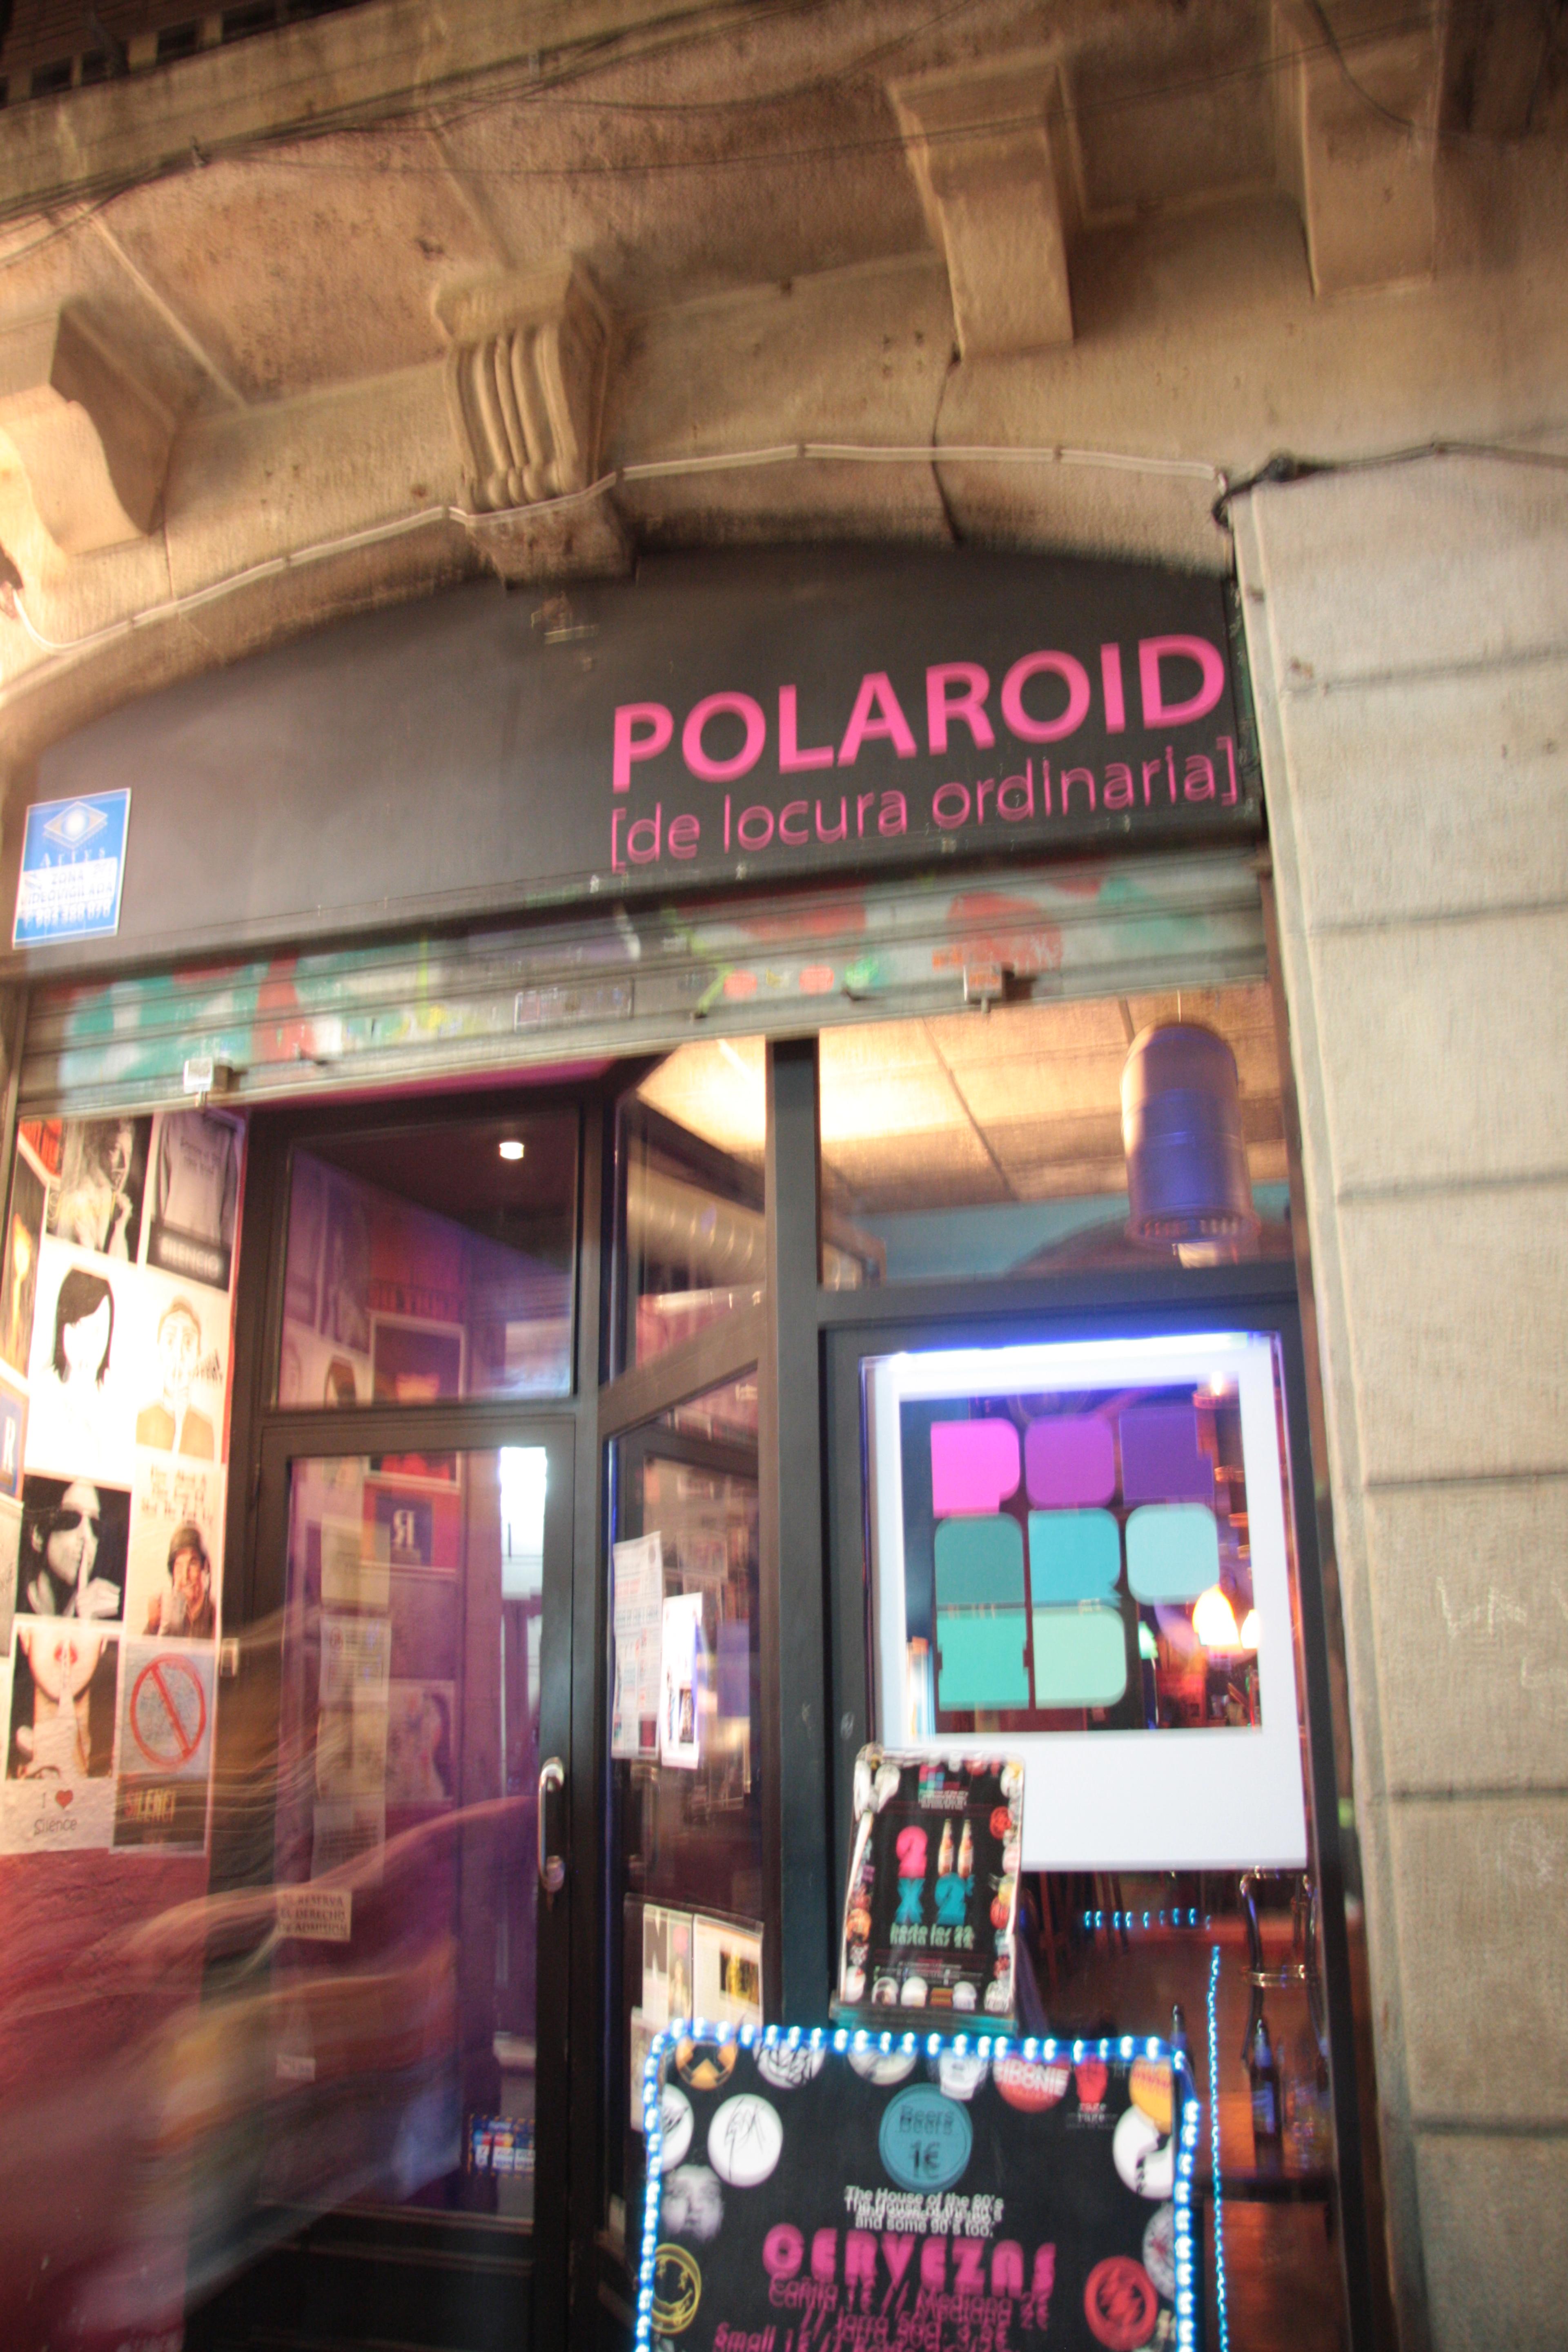 Cover image of this place Polaroid Bar